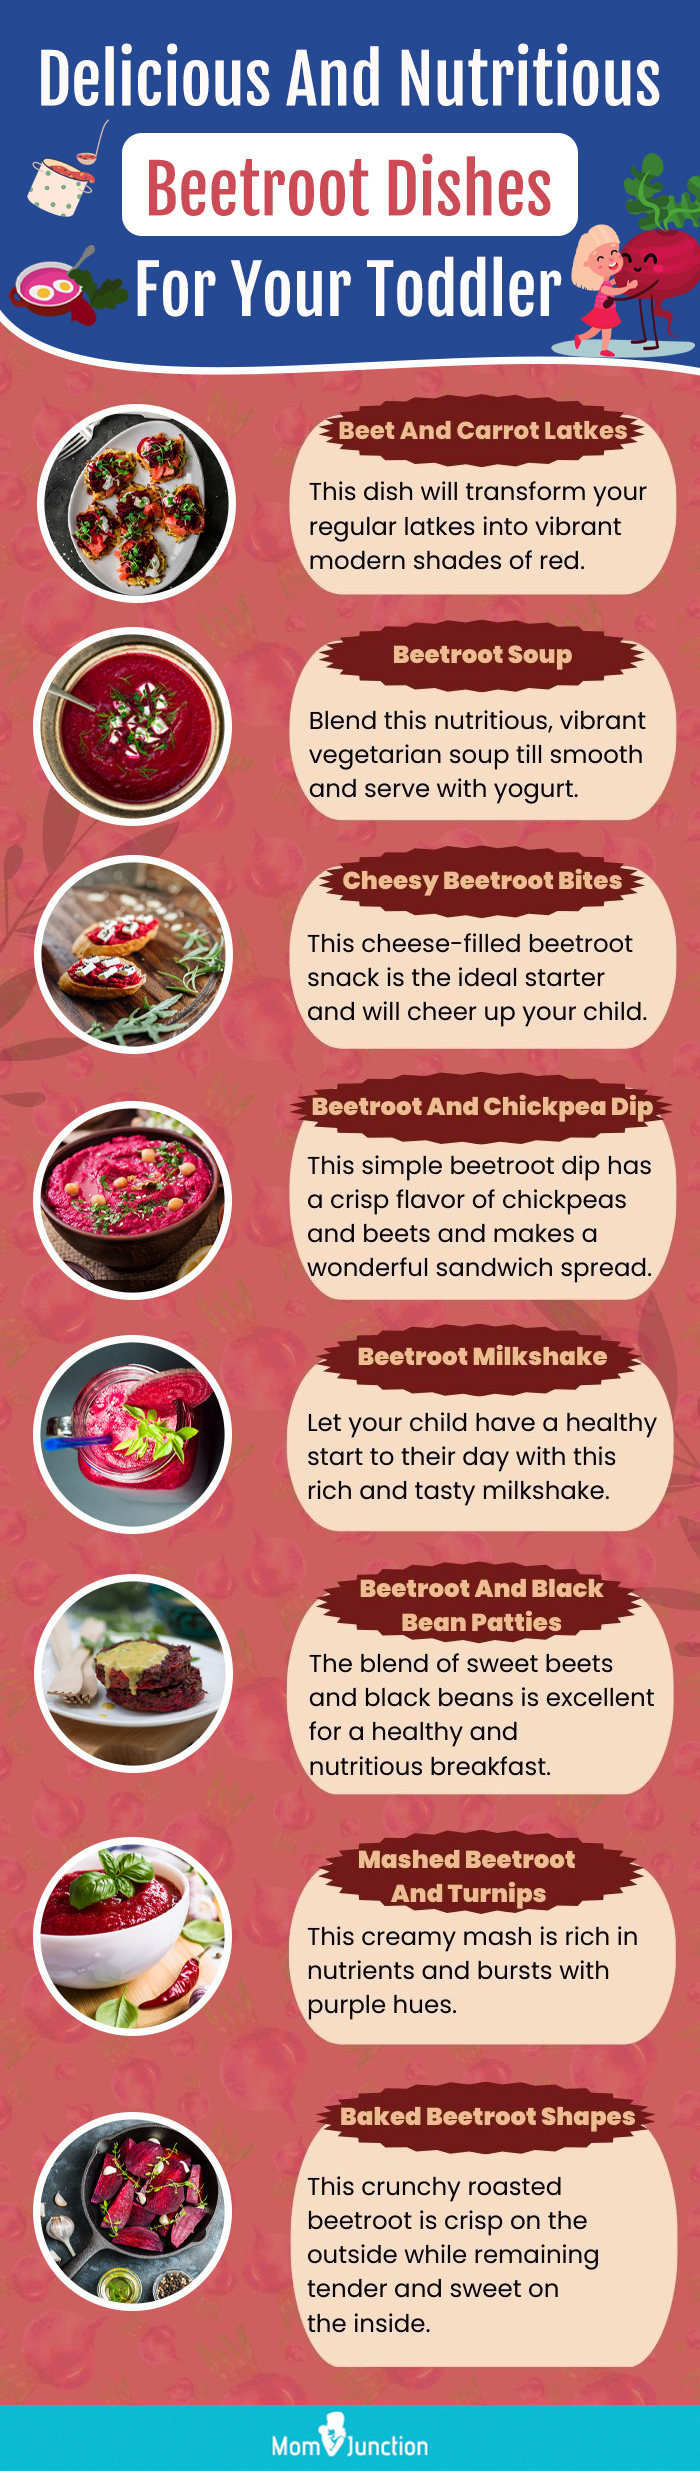 delicious and nutritious beetroot dishes for your toddler (infographic)